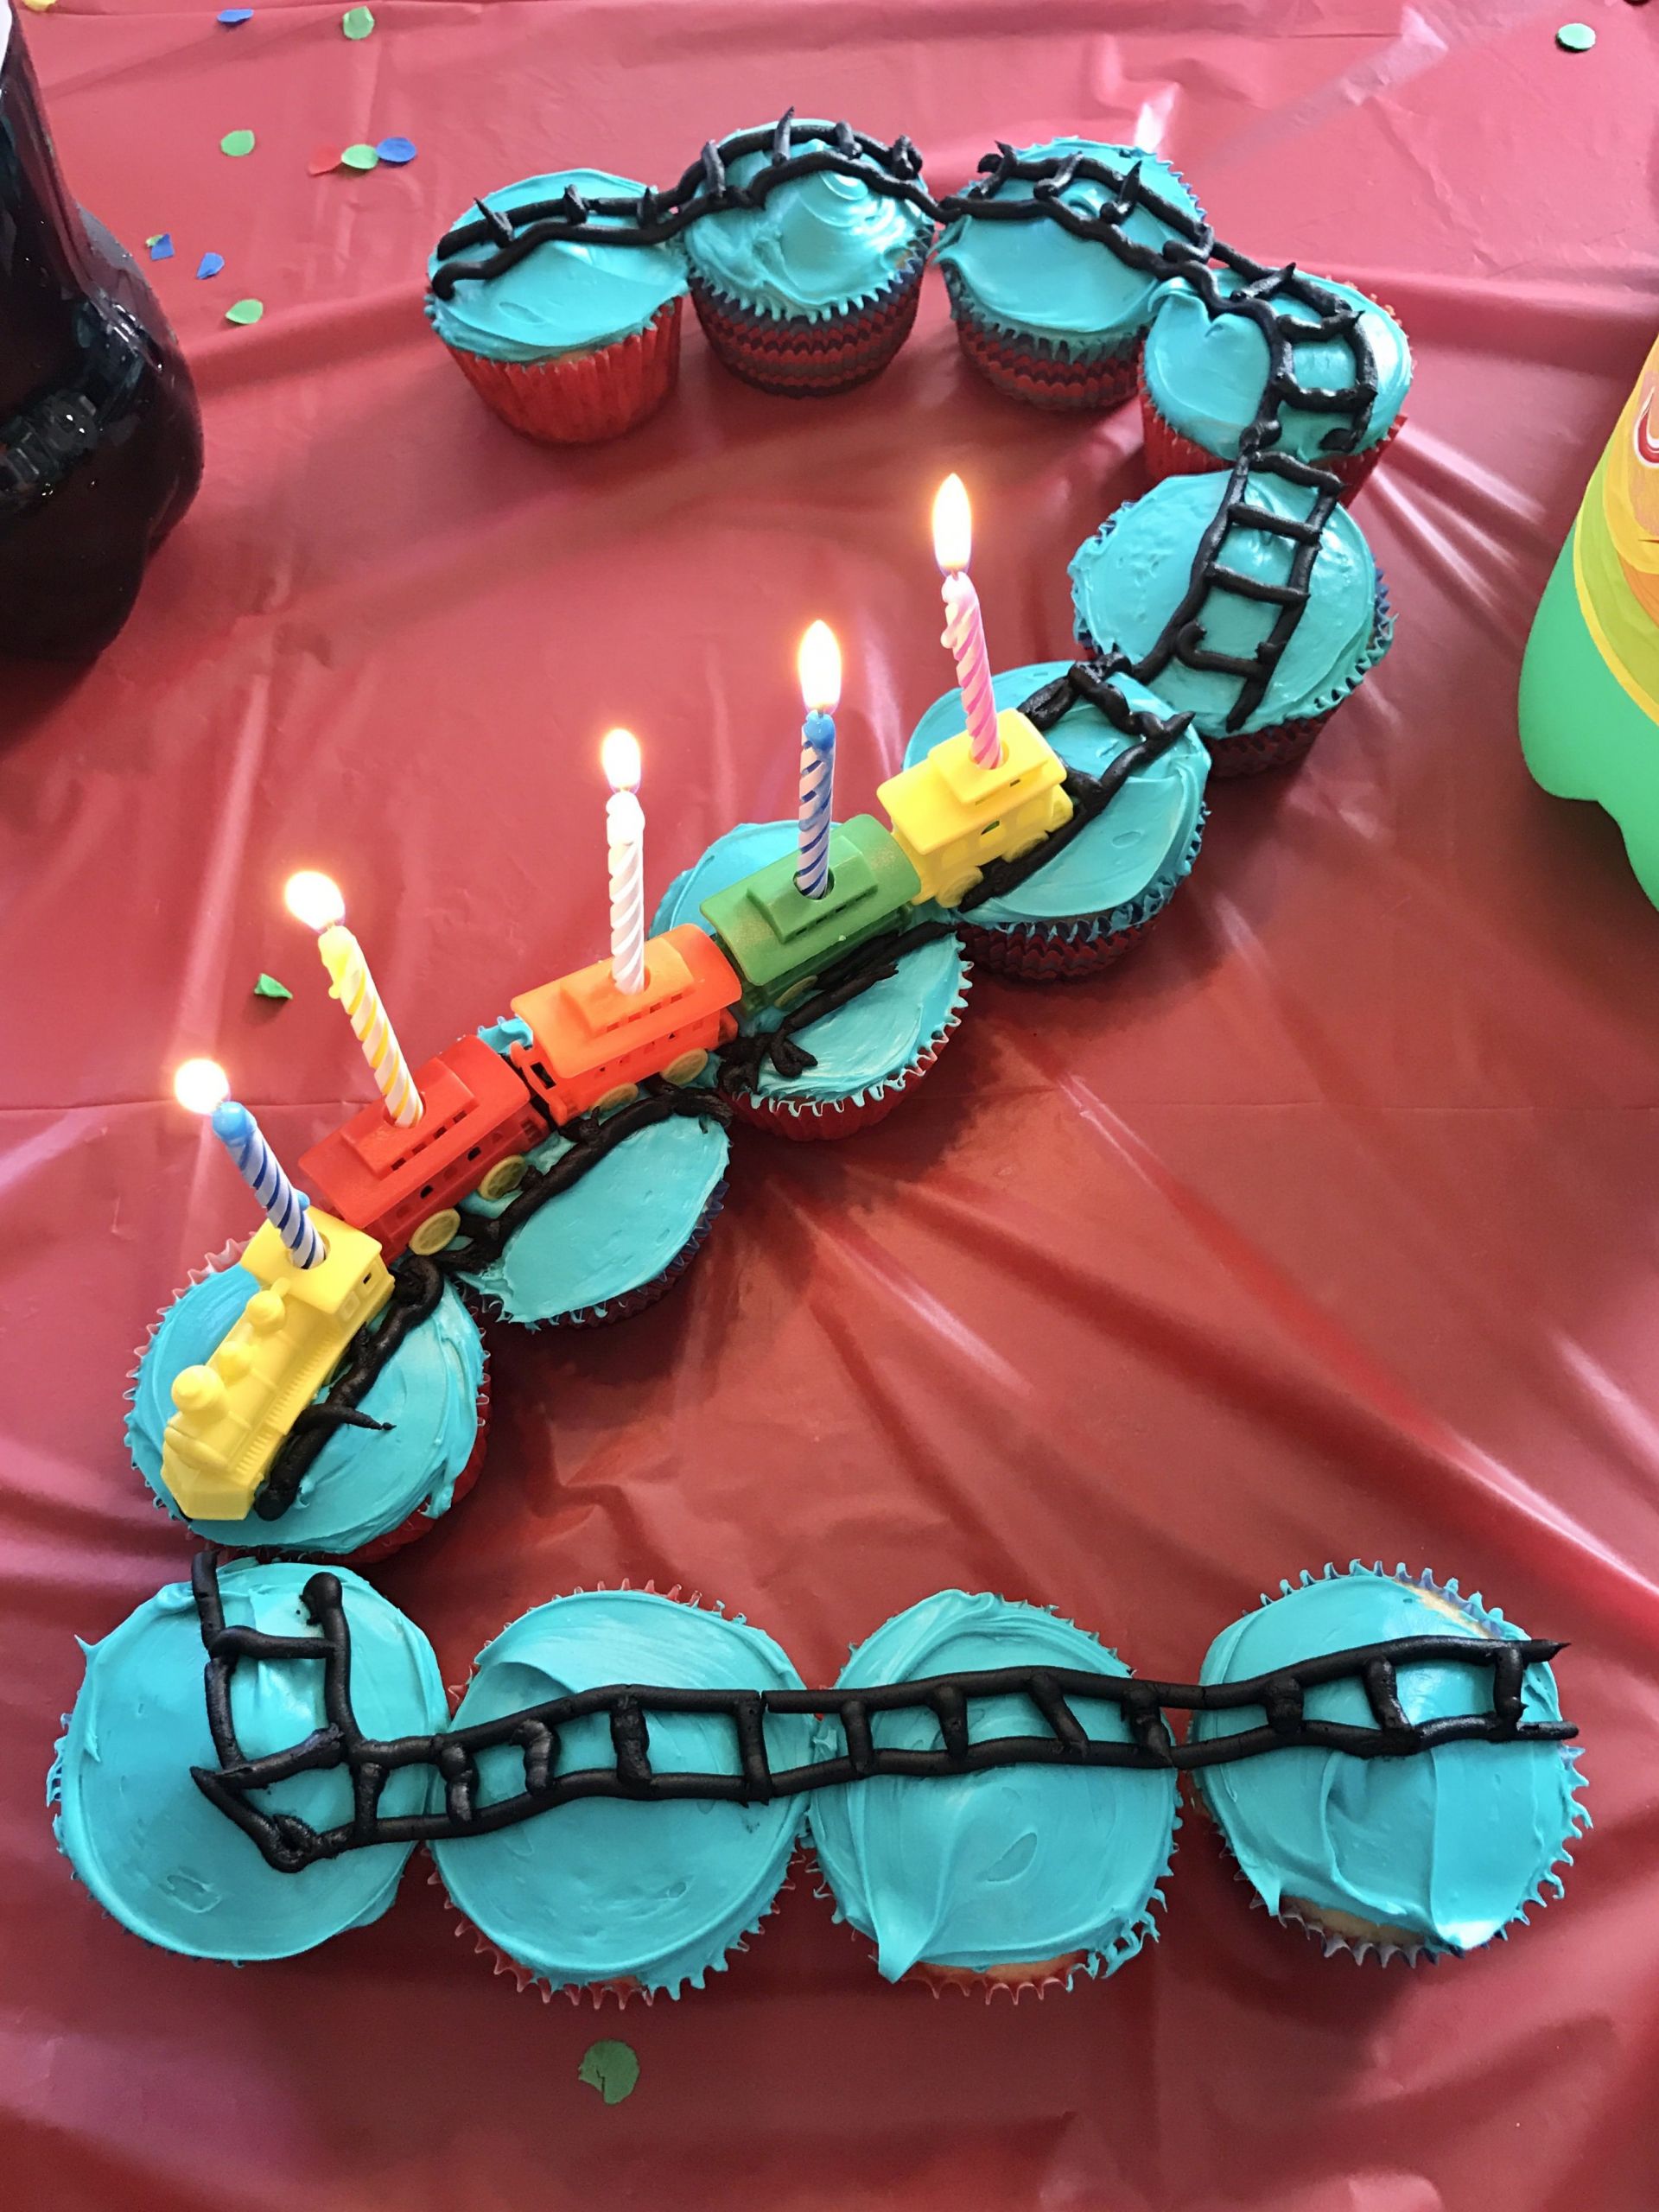 Two Years Old Birthday Party Ideas
 Train theme birthday party cupcakes for a two year old